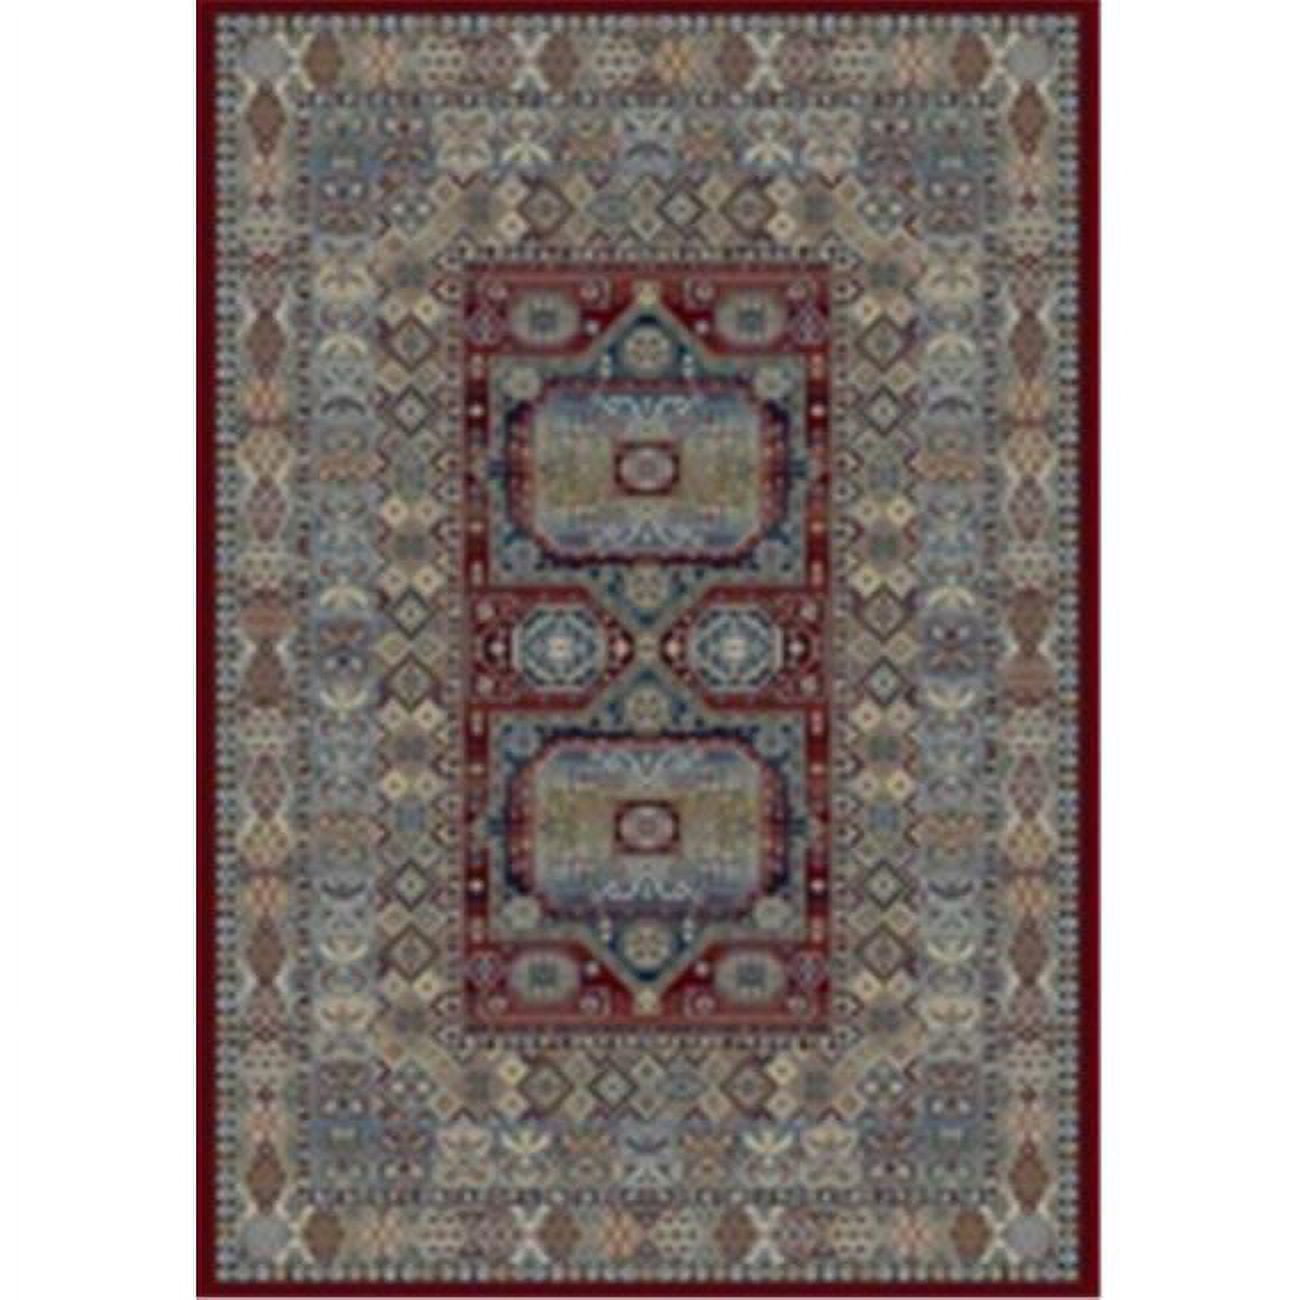 An1014571471454 Ancient Garden Rugs, Red - 9.2 X 12.10 In.